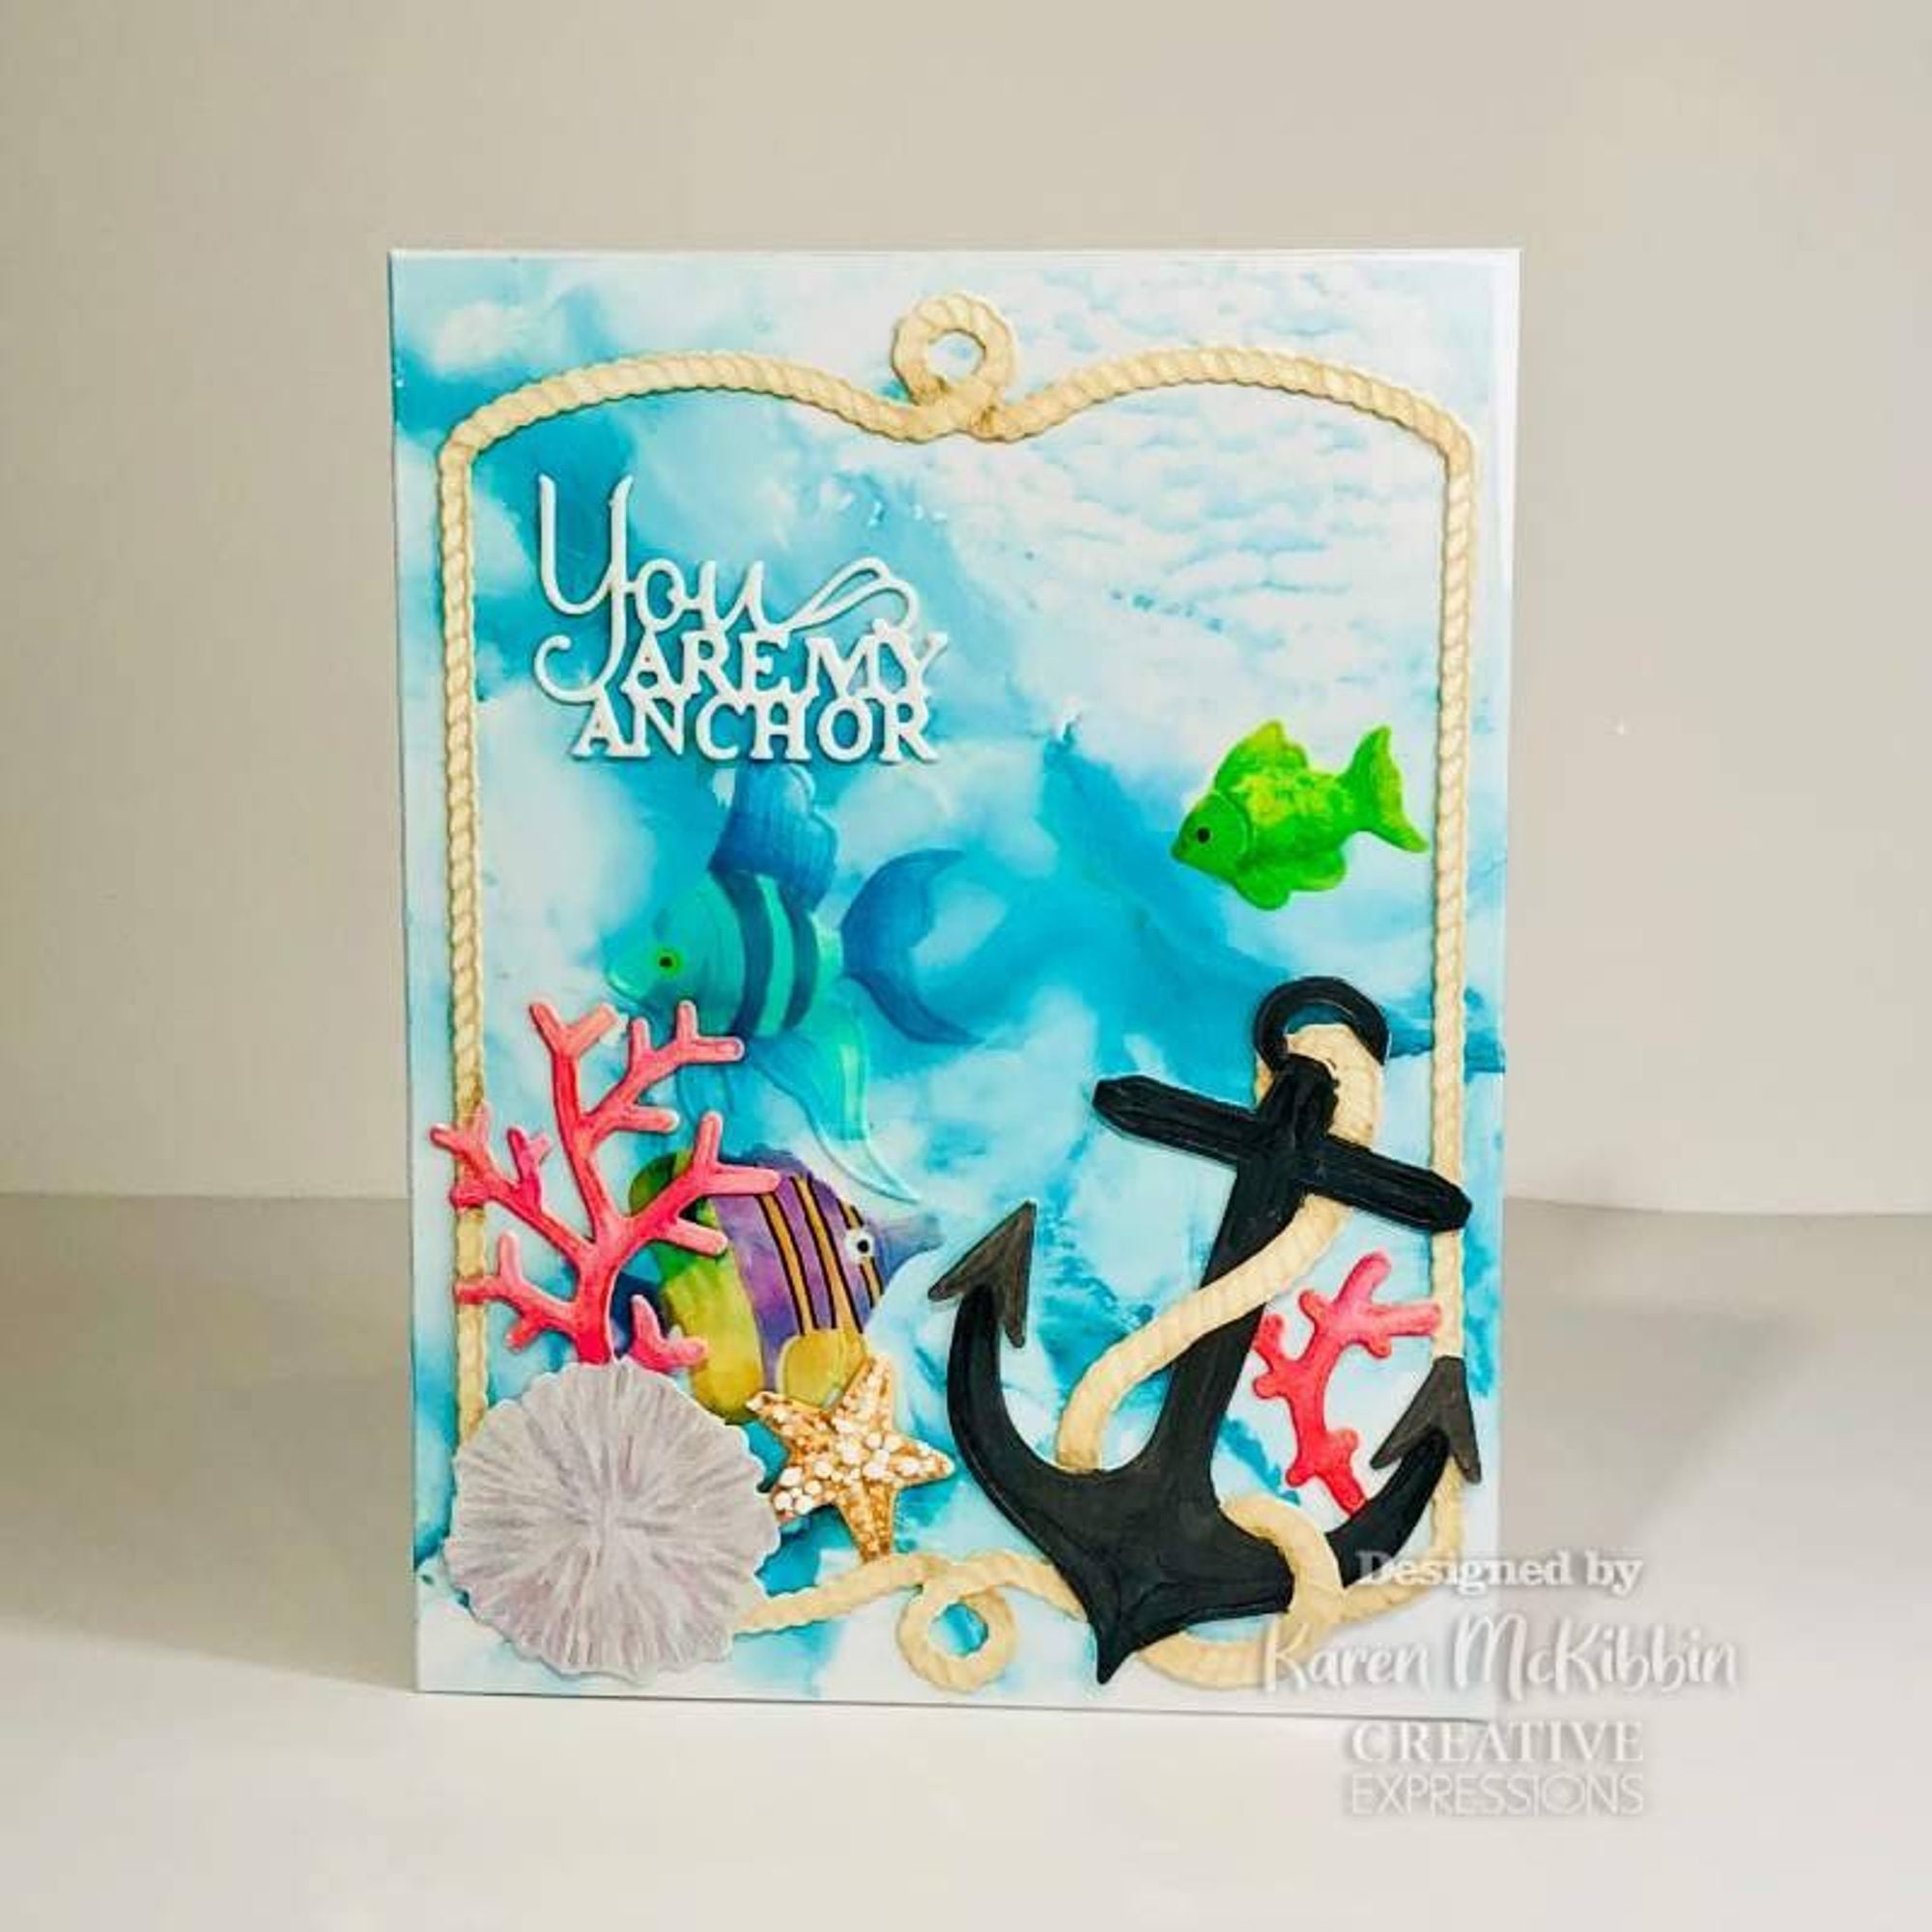 Creative Expressions Sue Wilson You Are My Anchor Frame Die